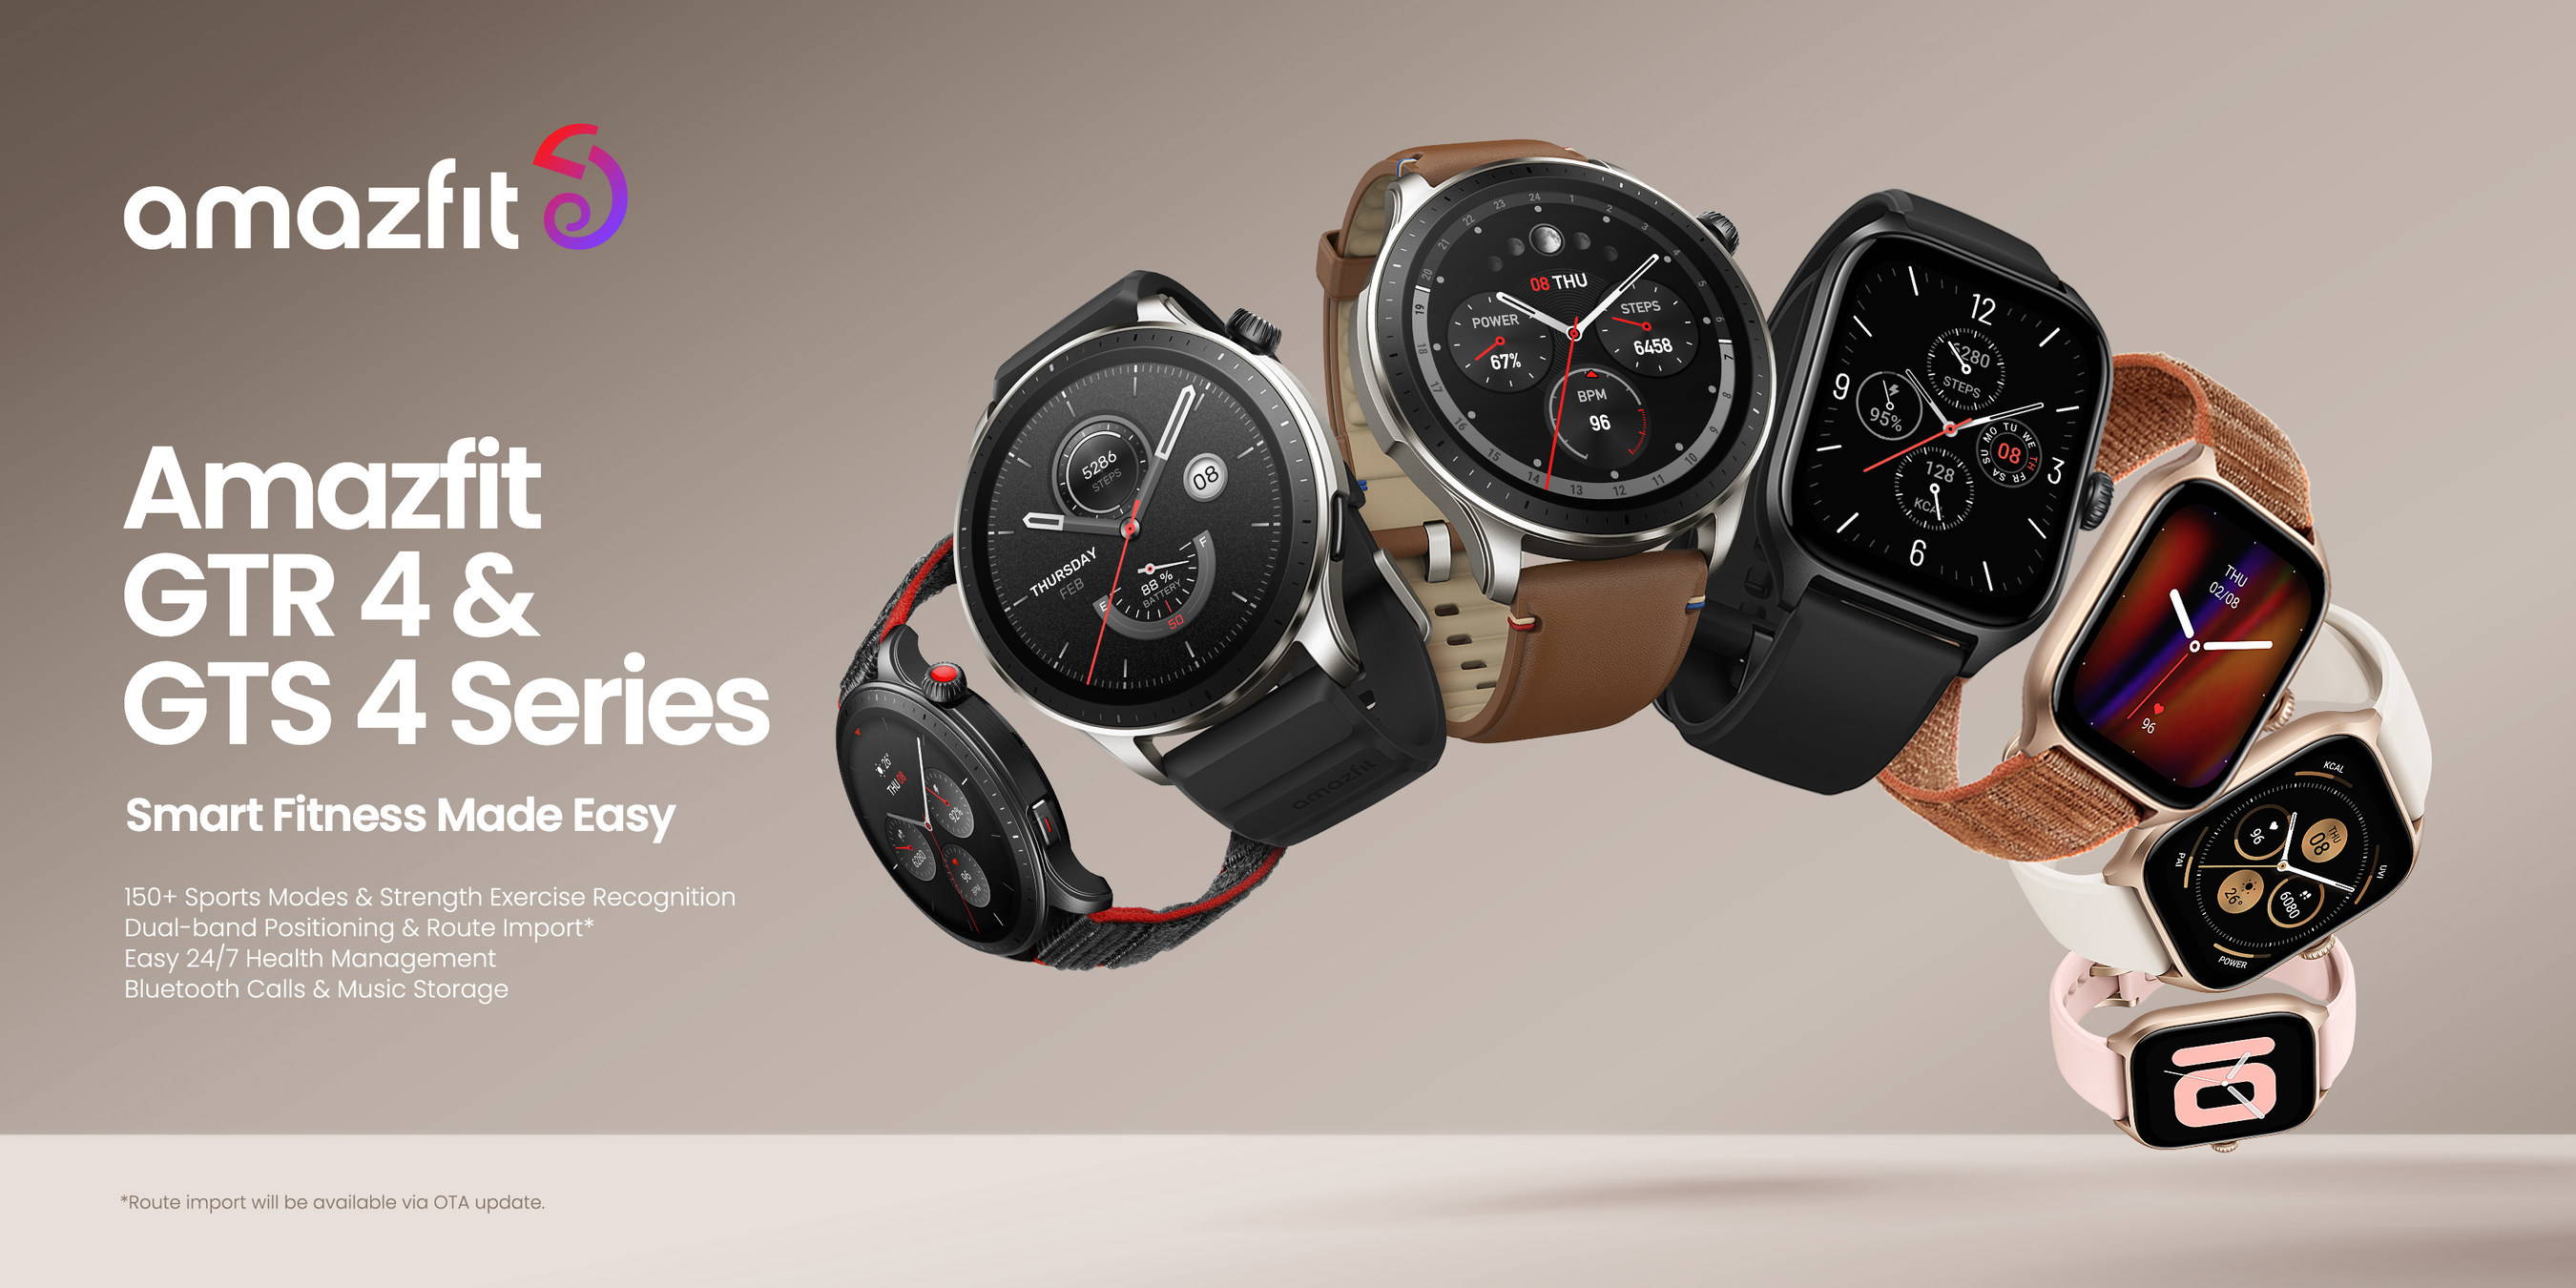 Amazfit GTR 4 and GTS 4 Smart Watch